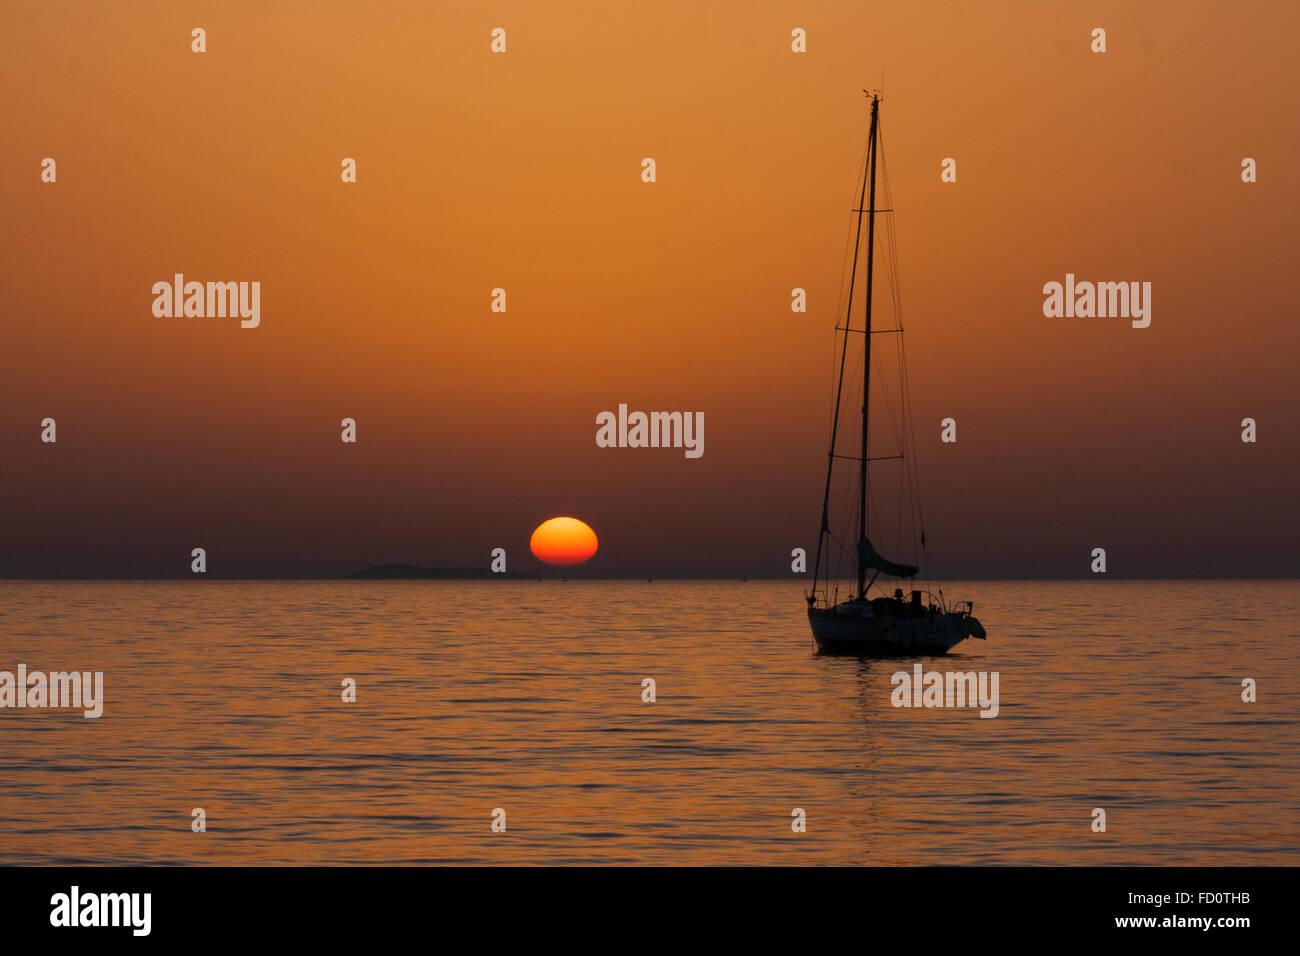 fading sun sunset at sea with yacht silhouette Stock Photo